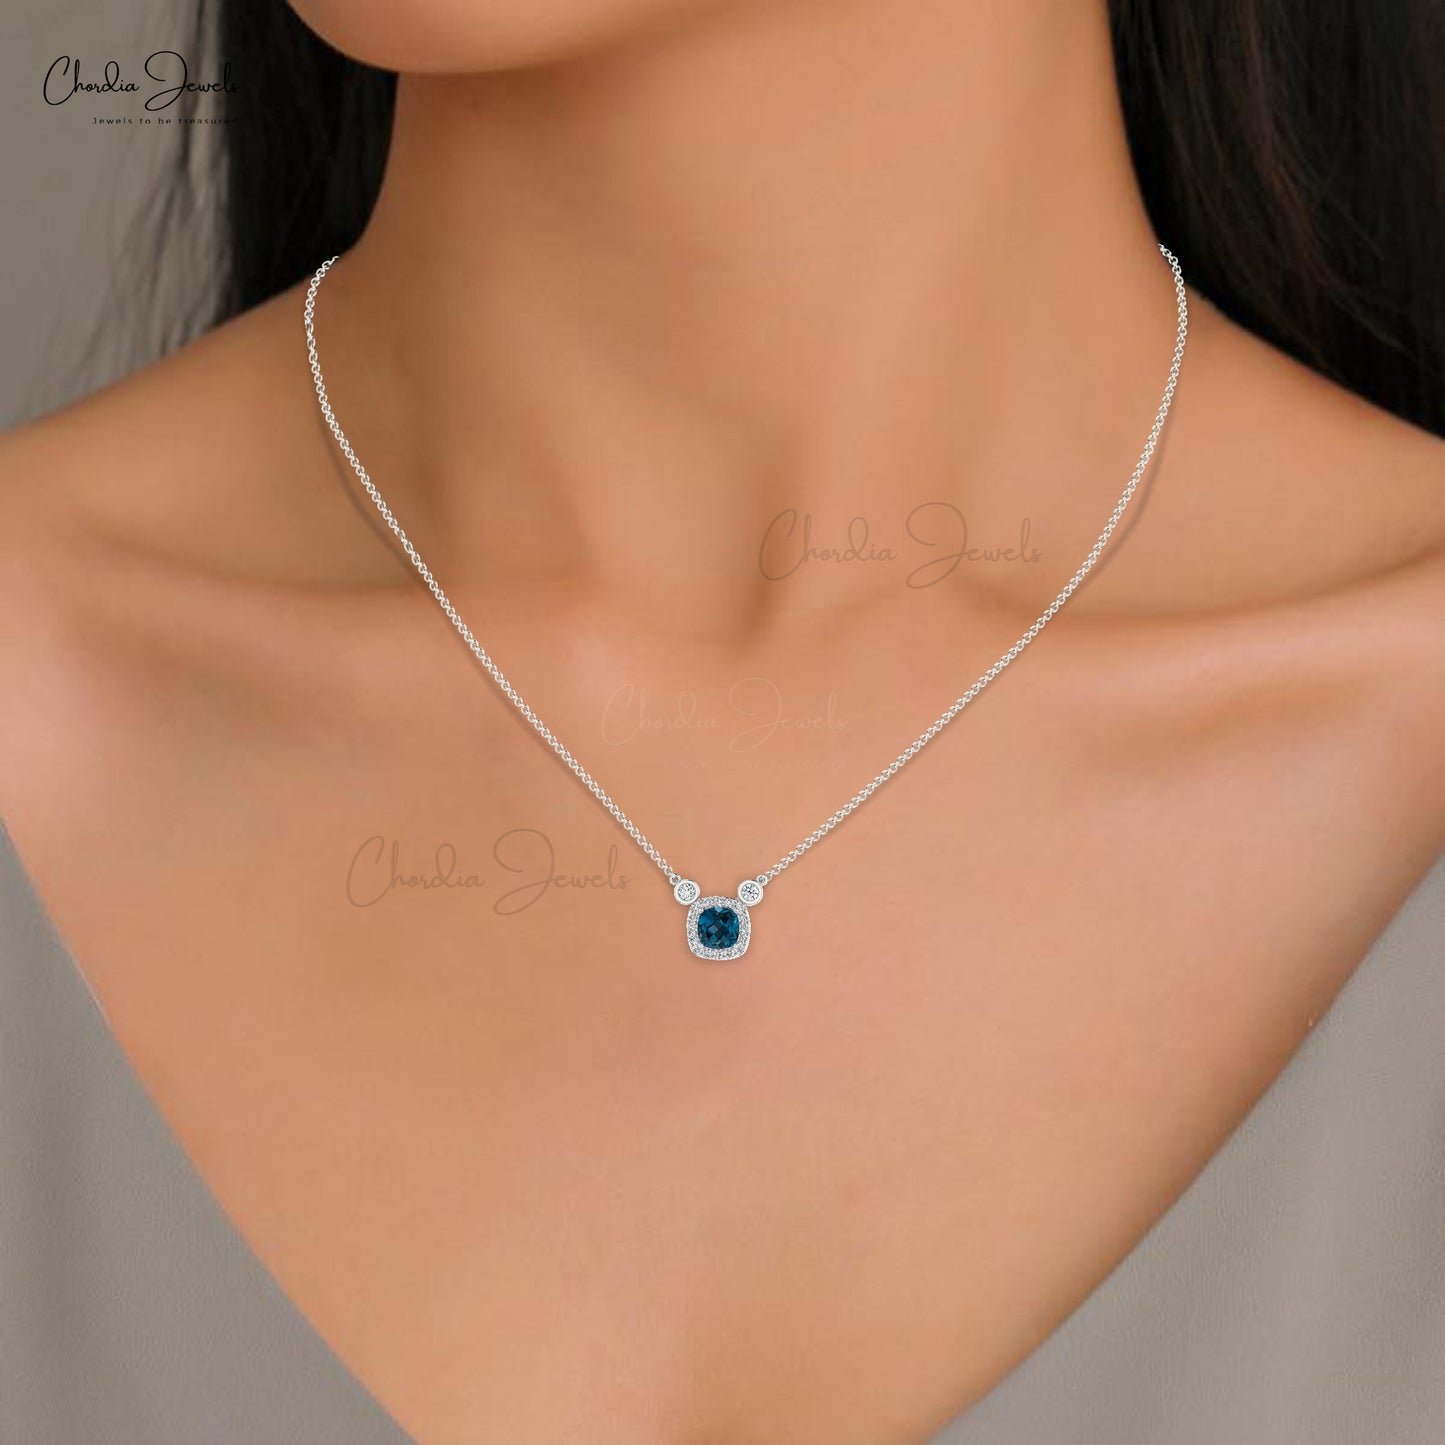 Natural London Blue Topaz Cushion Cut Handmade Necklace 14k Solid Gold Diamond Necklace 4mm Gemstone Halo Necklace For Women's